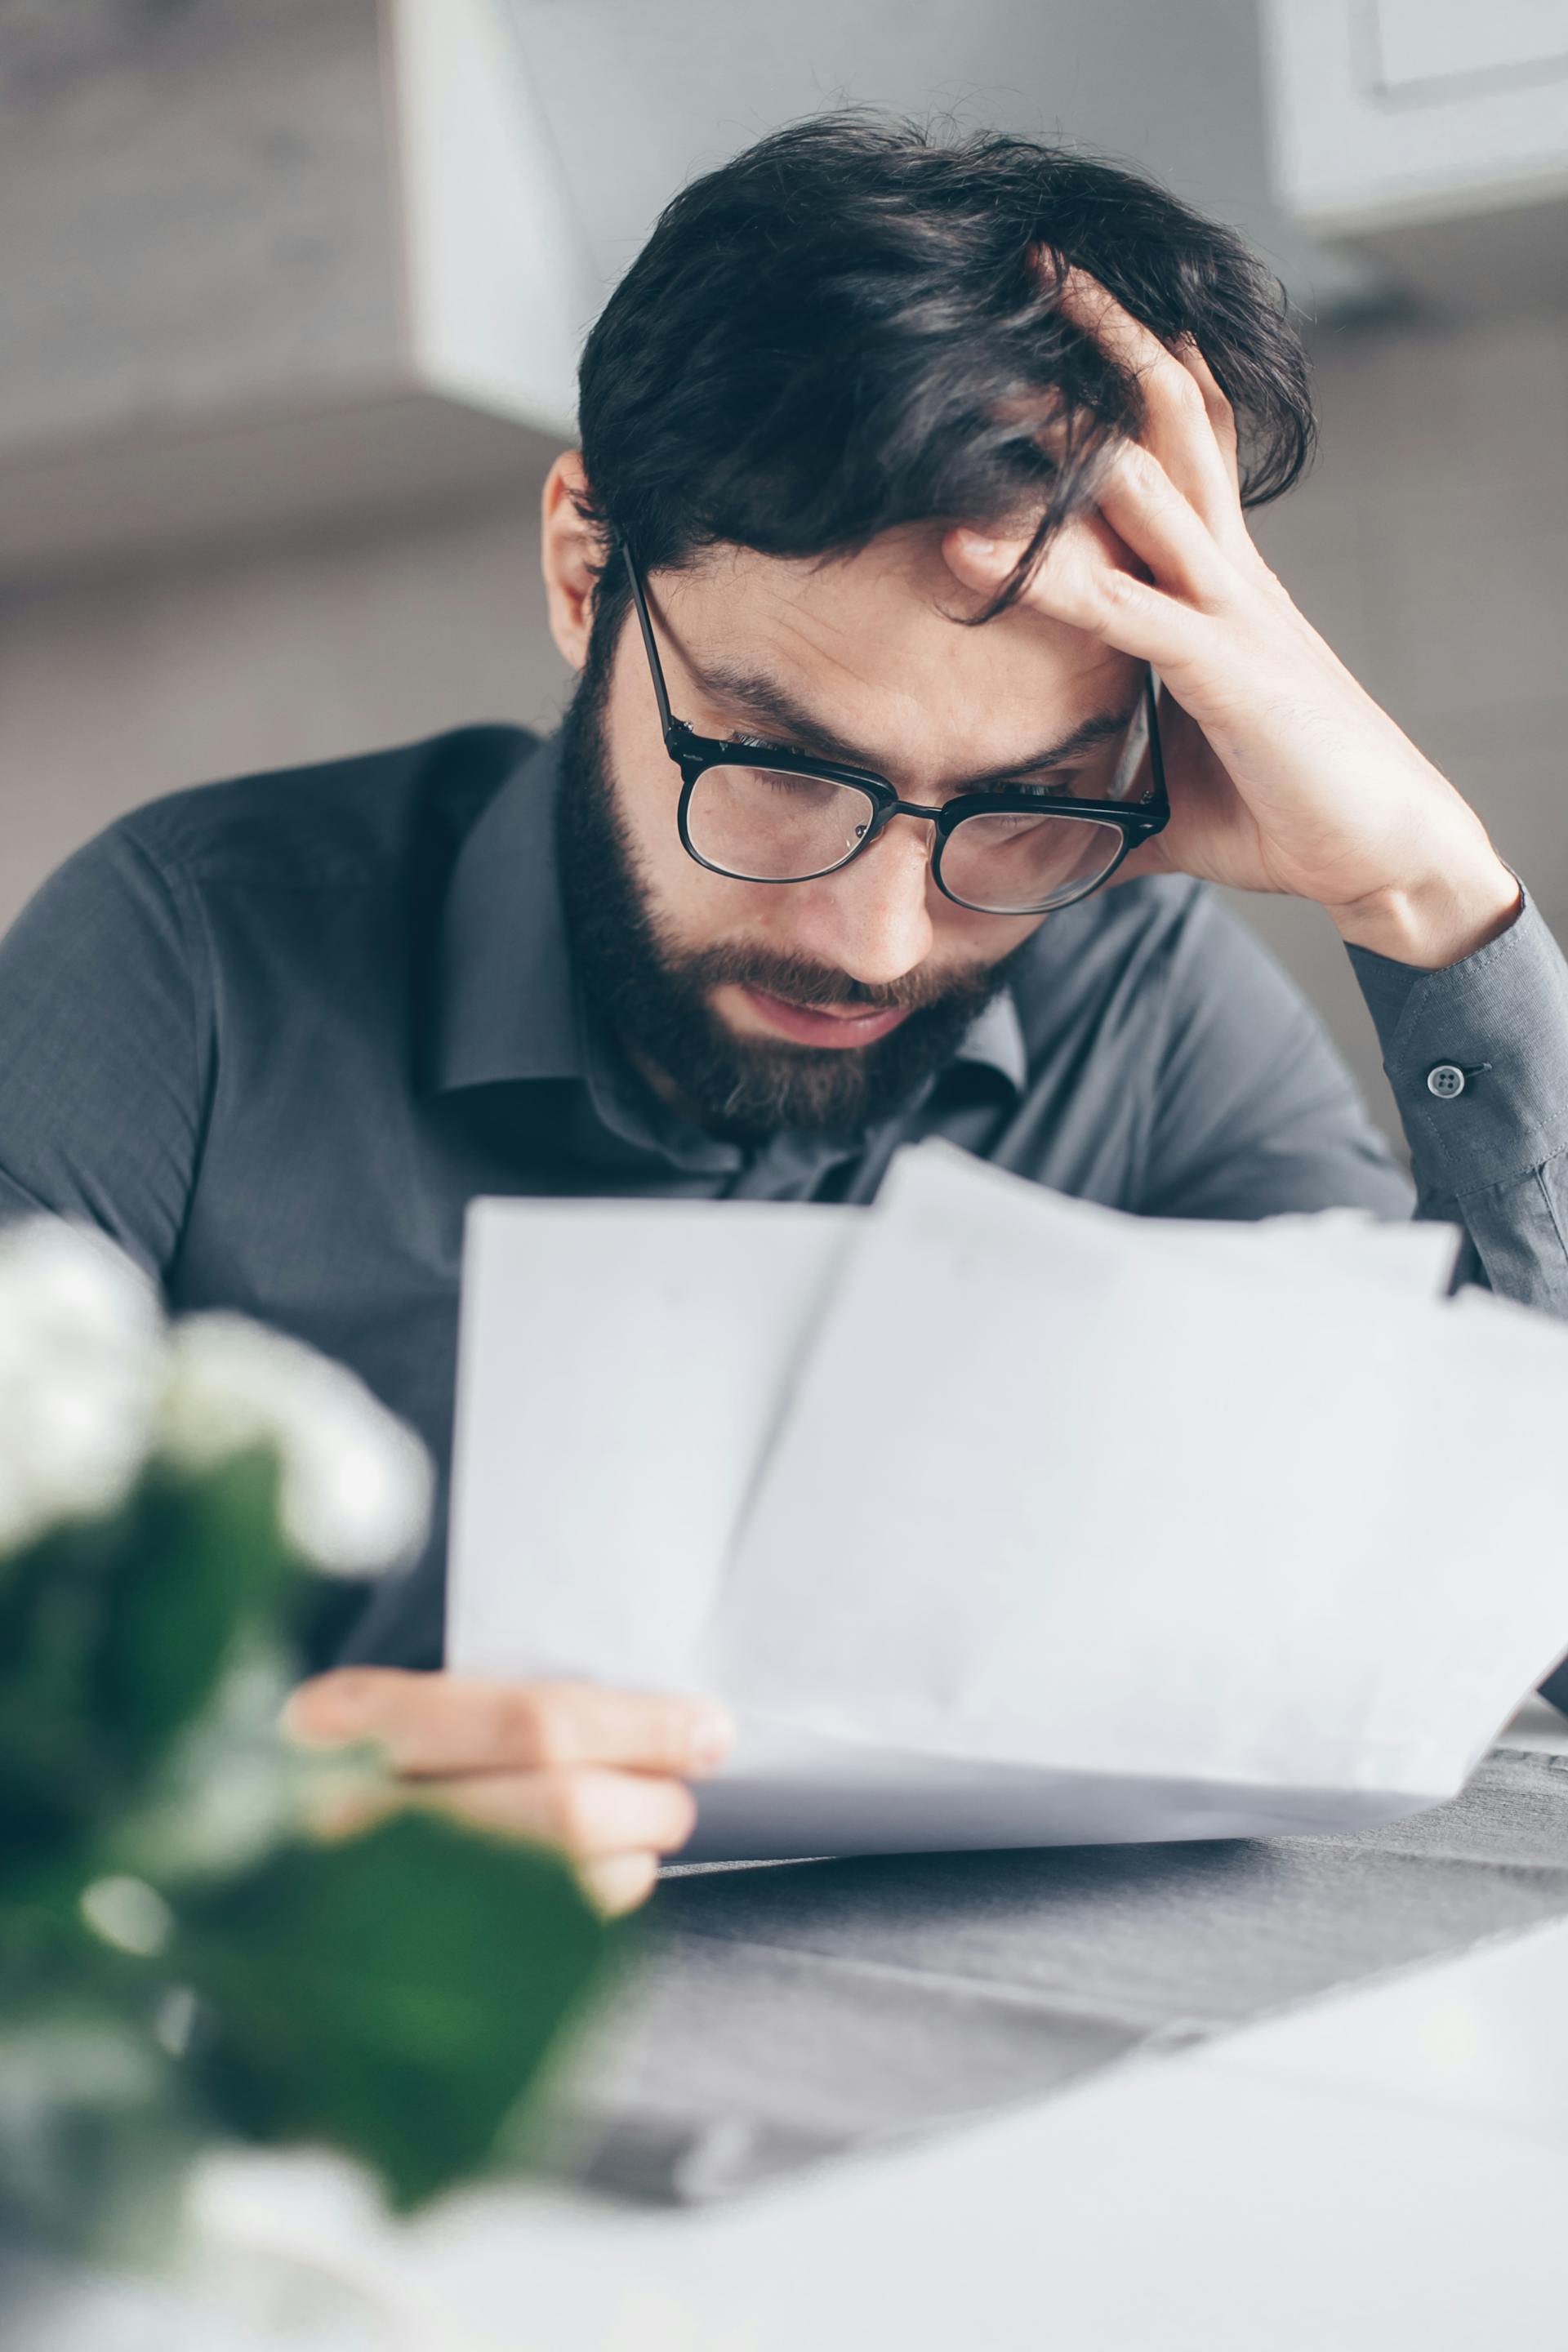 A man looking disturbed while reading the documents in his hand | Source: Pexels